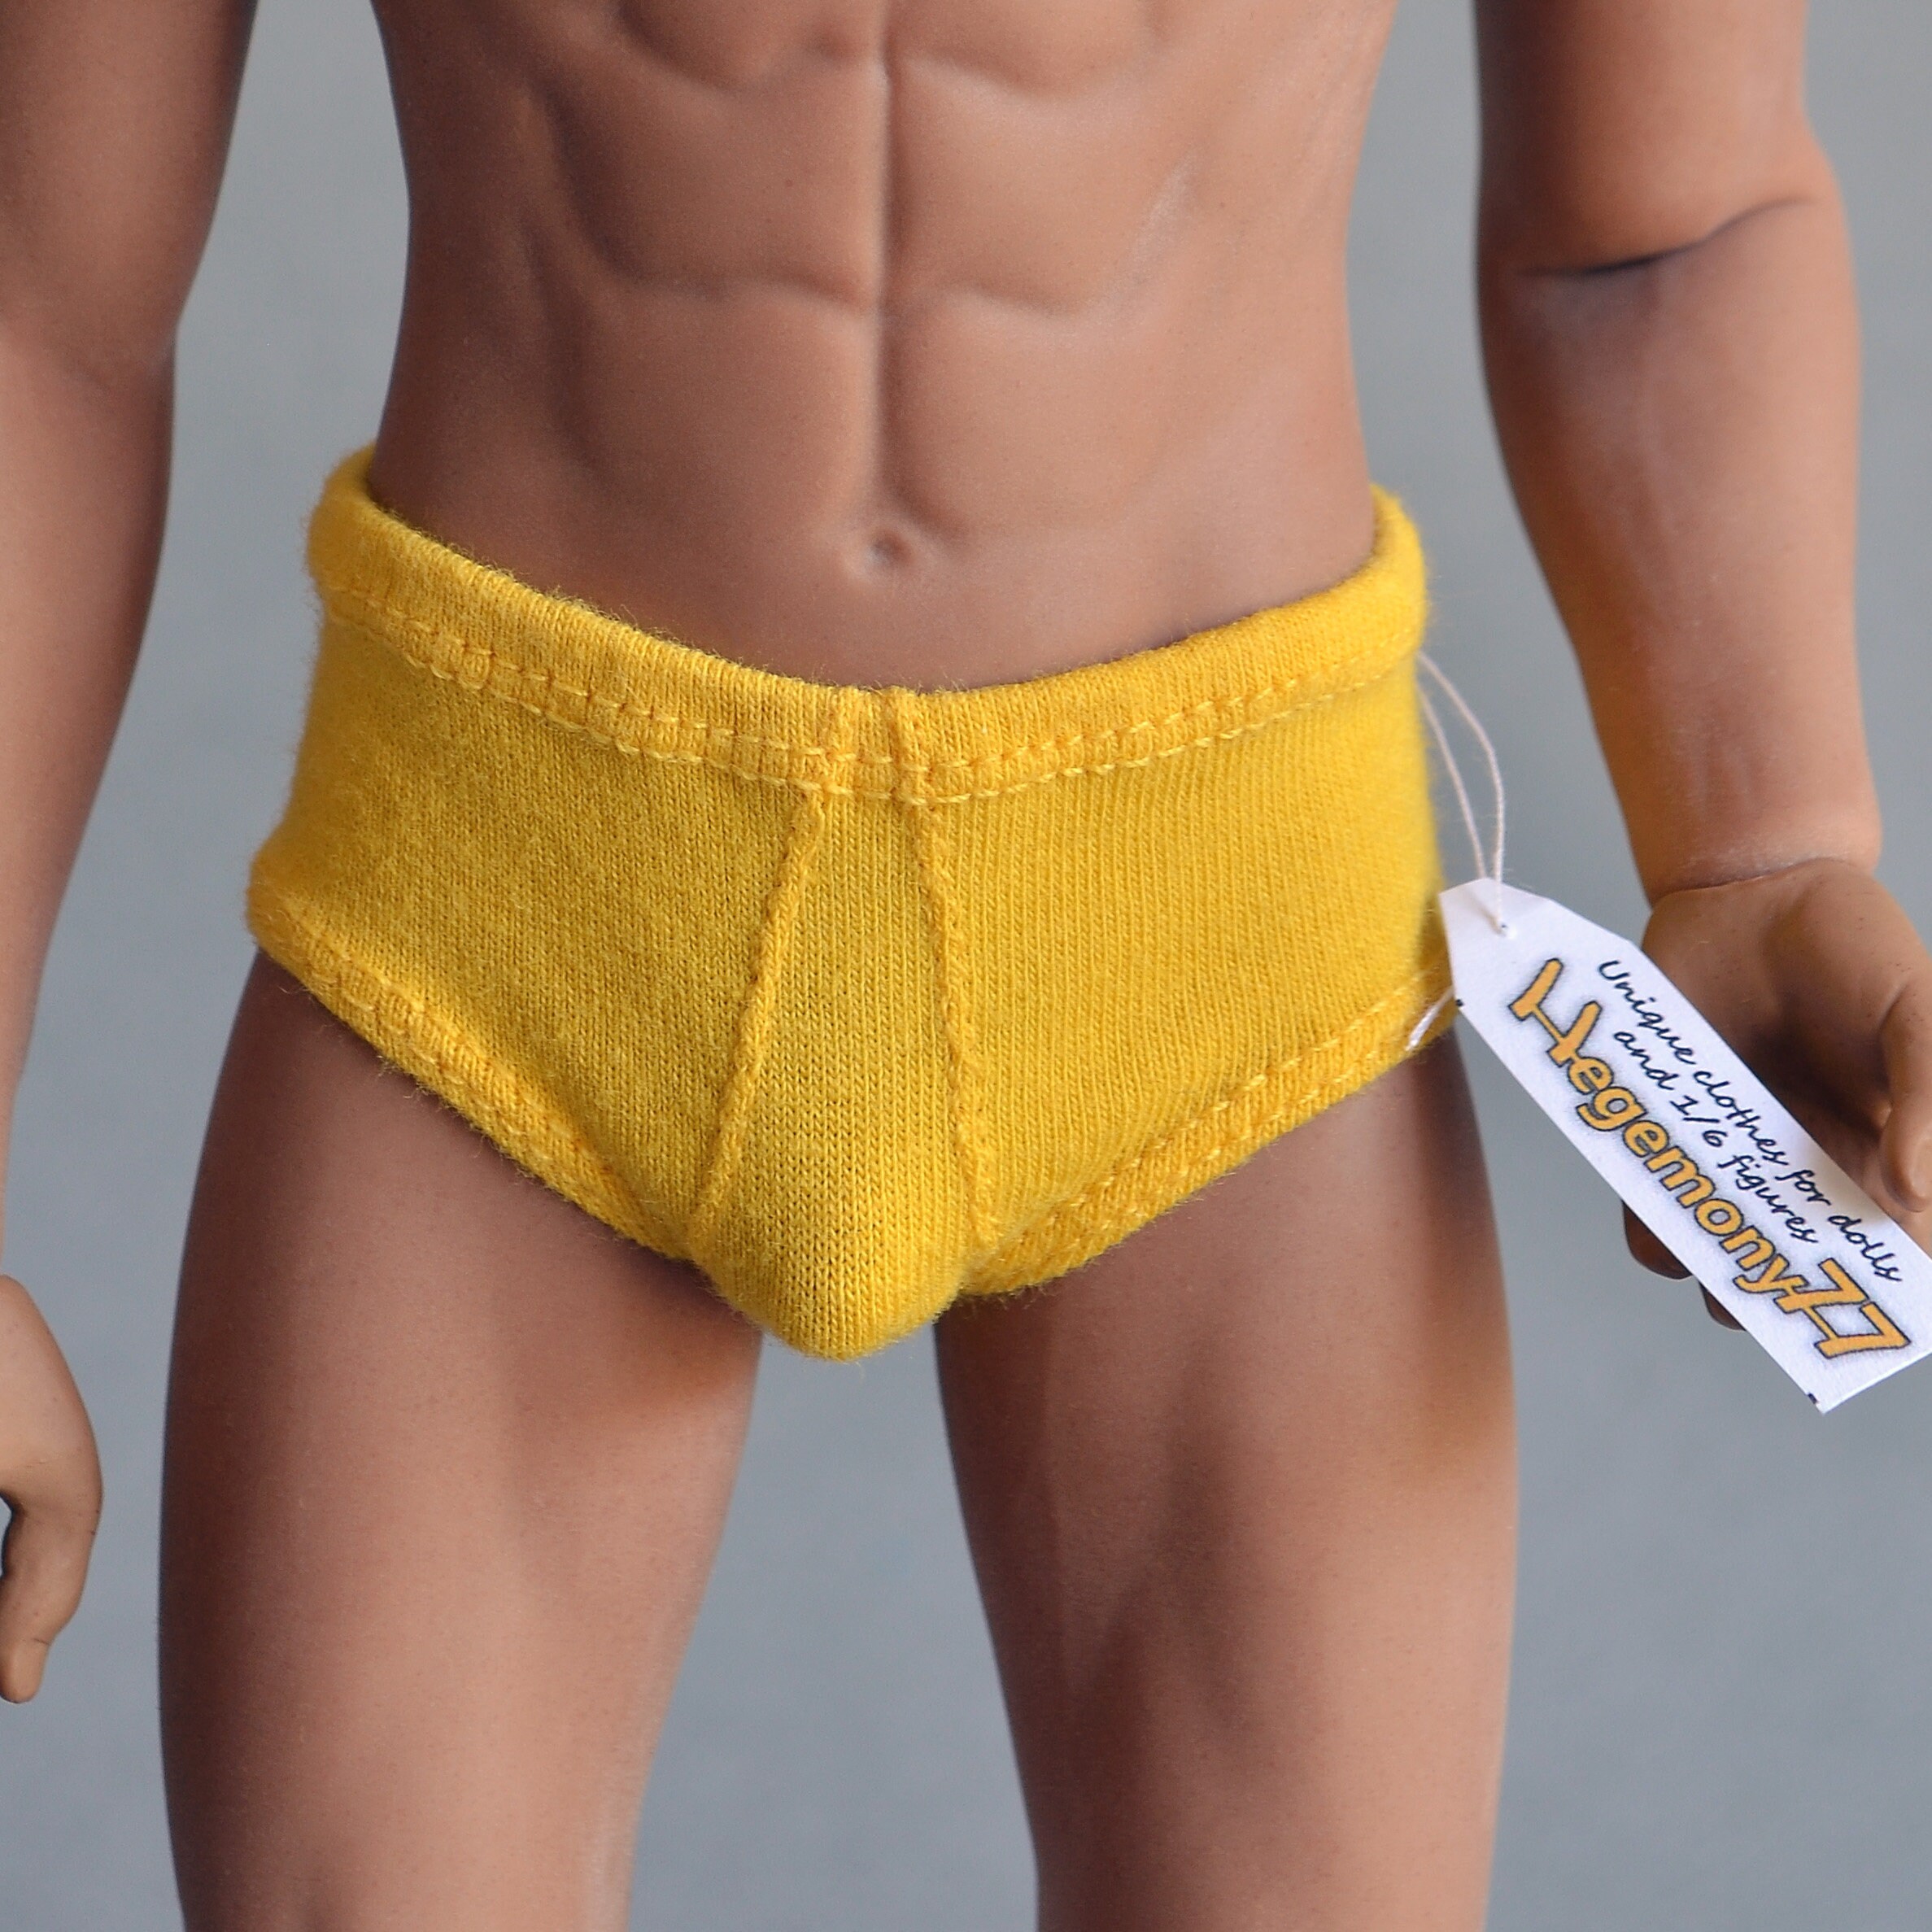 HiPlay 1/6 Scale Male Figure Doll Clothes: Red Colored Belt Boxer